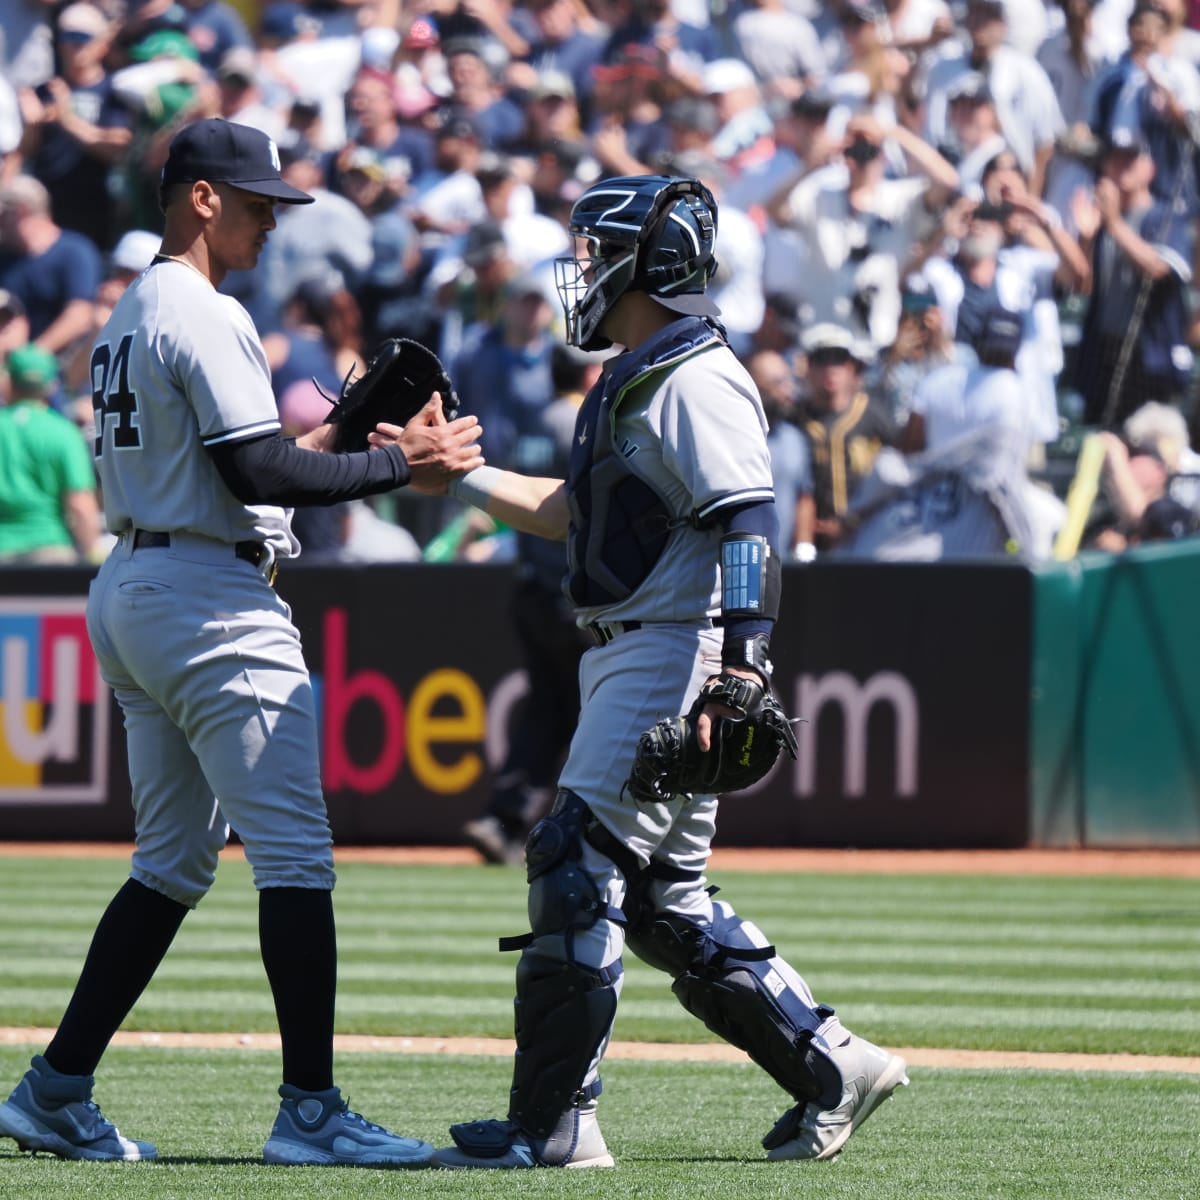 New York Yankees set HR record, beat Boston Red Sox for 100th win